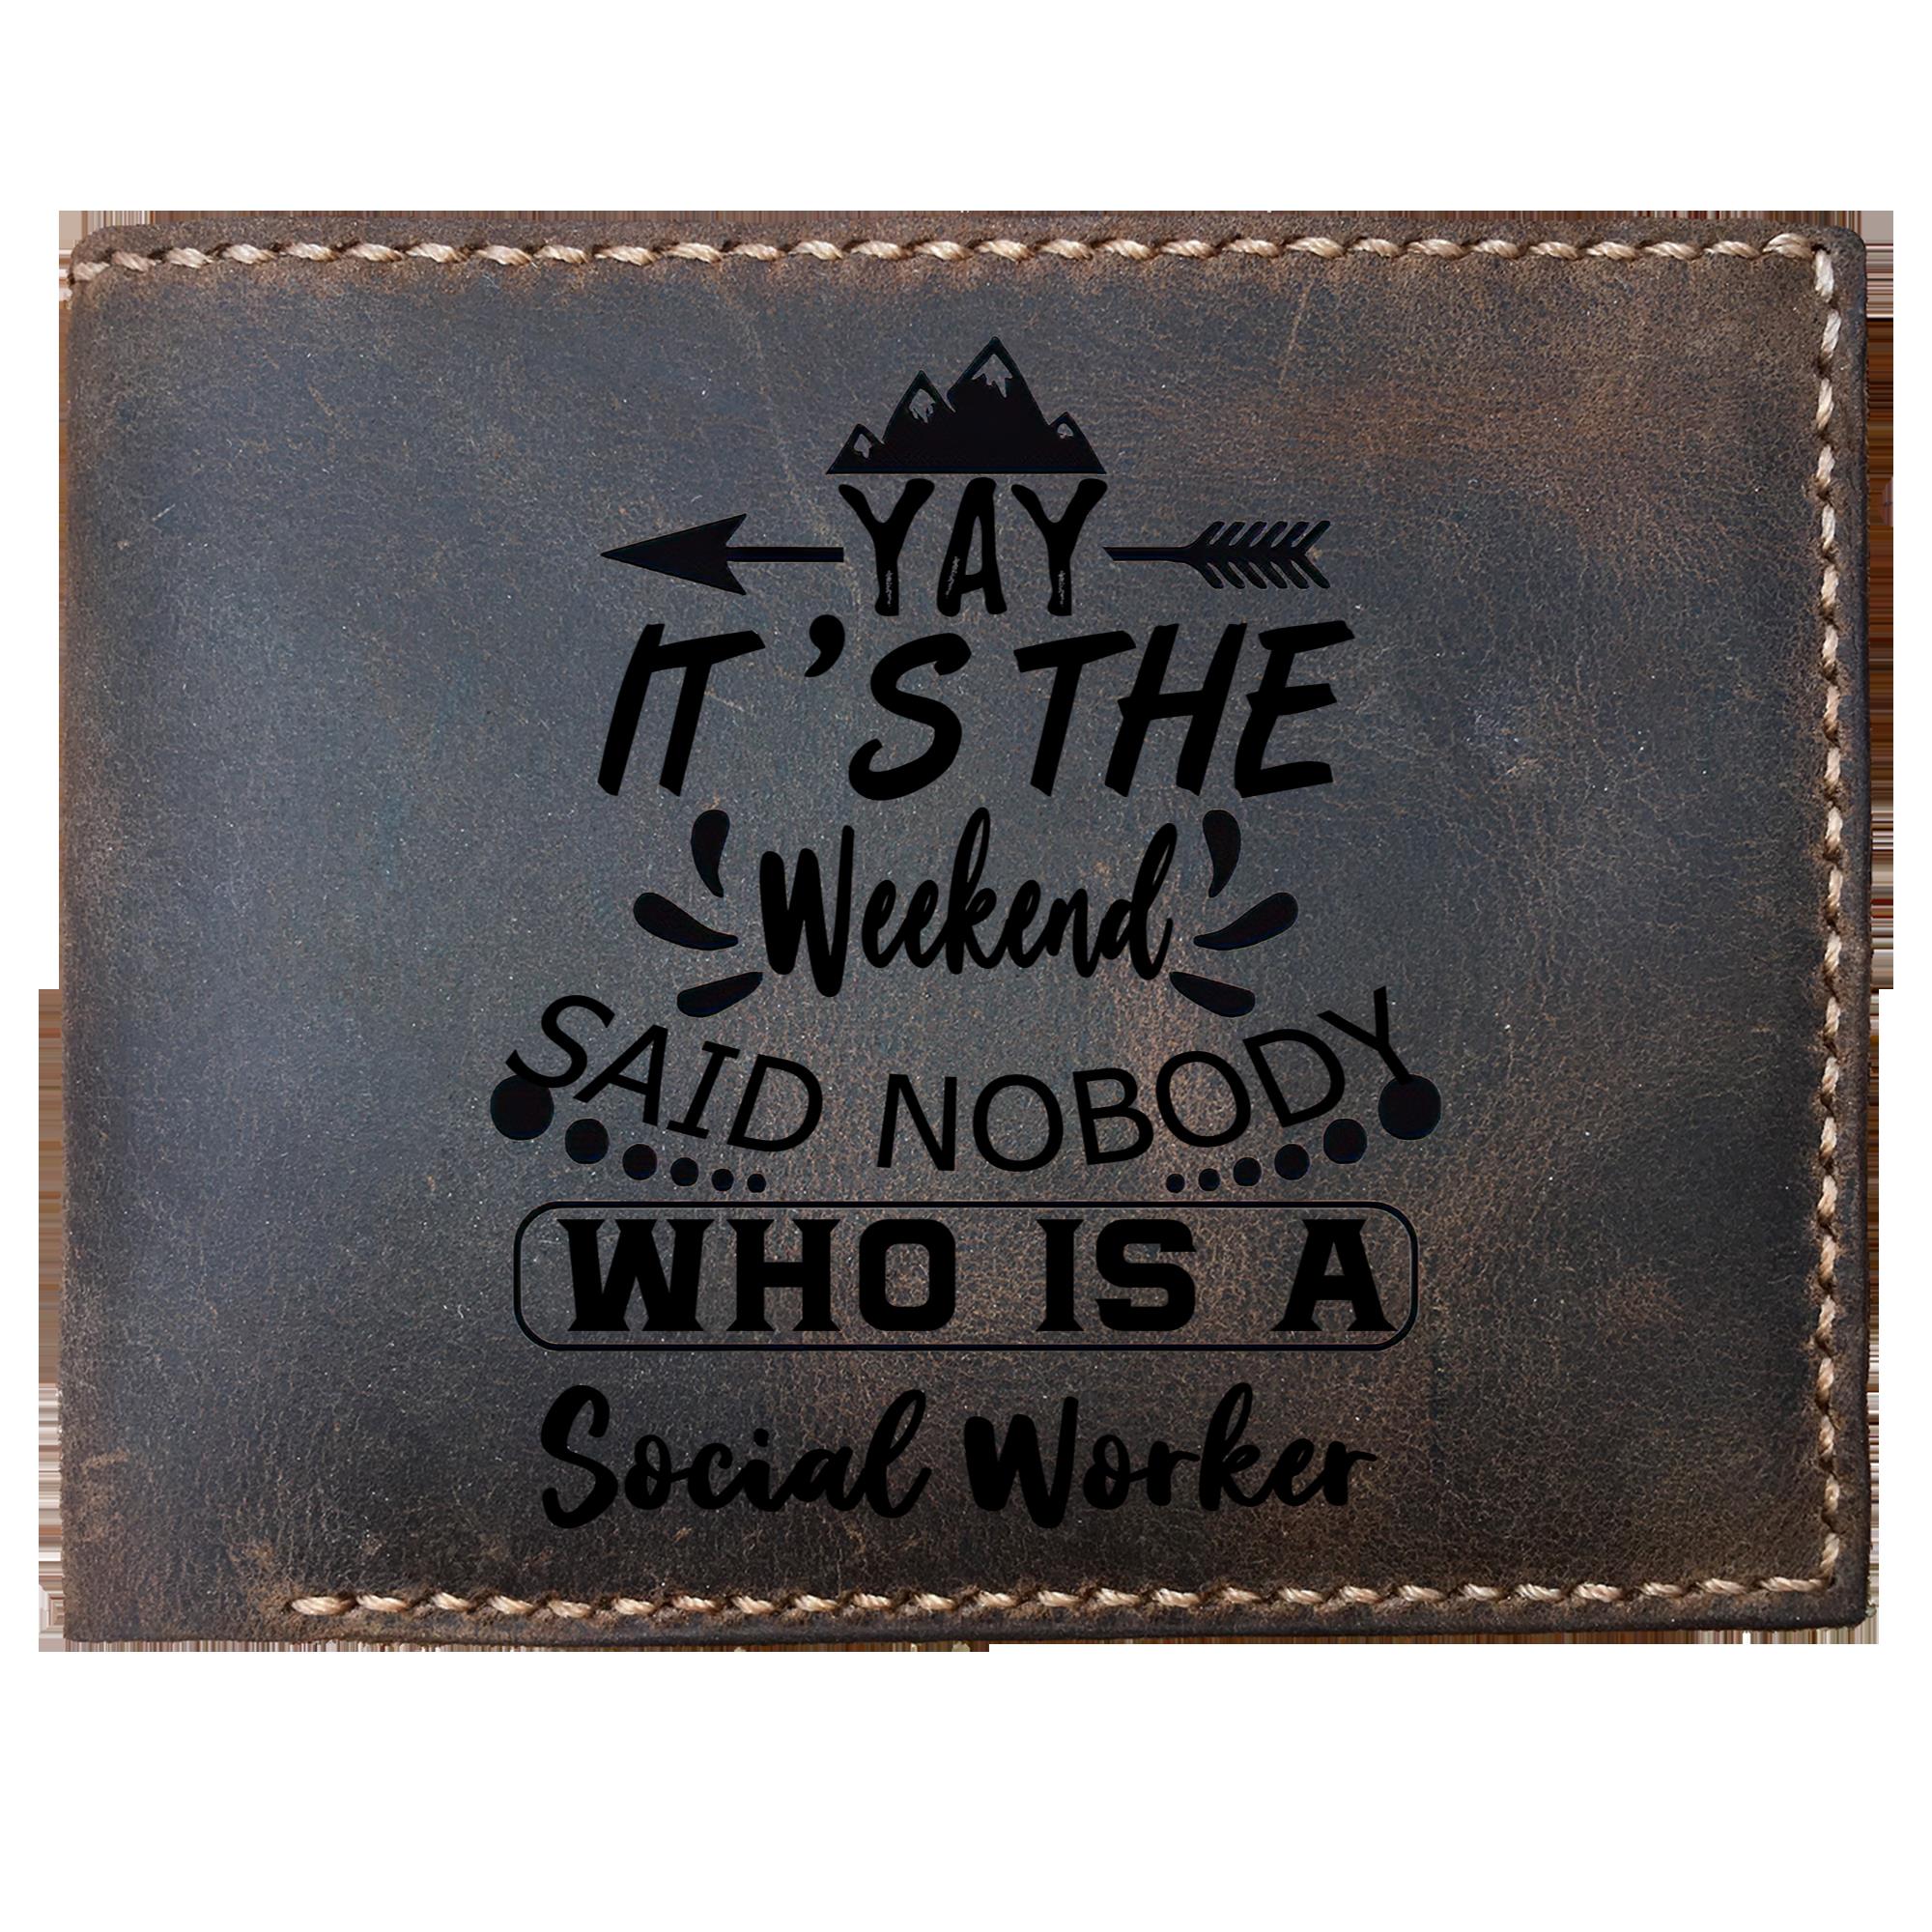 Skitongifts Funny Custom Laser Engraved Bifold Leather Wallet For Men, It's The Weekend Said Nobody Who Is A Social Worker, Father's Day Gifts